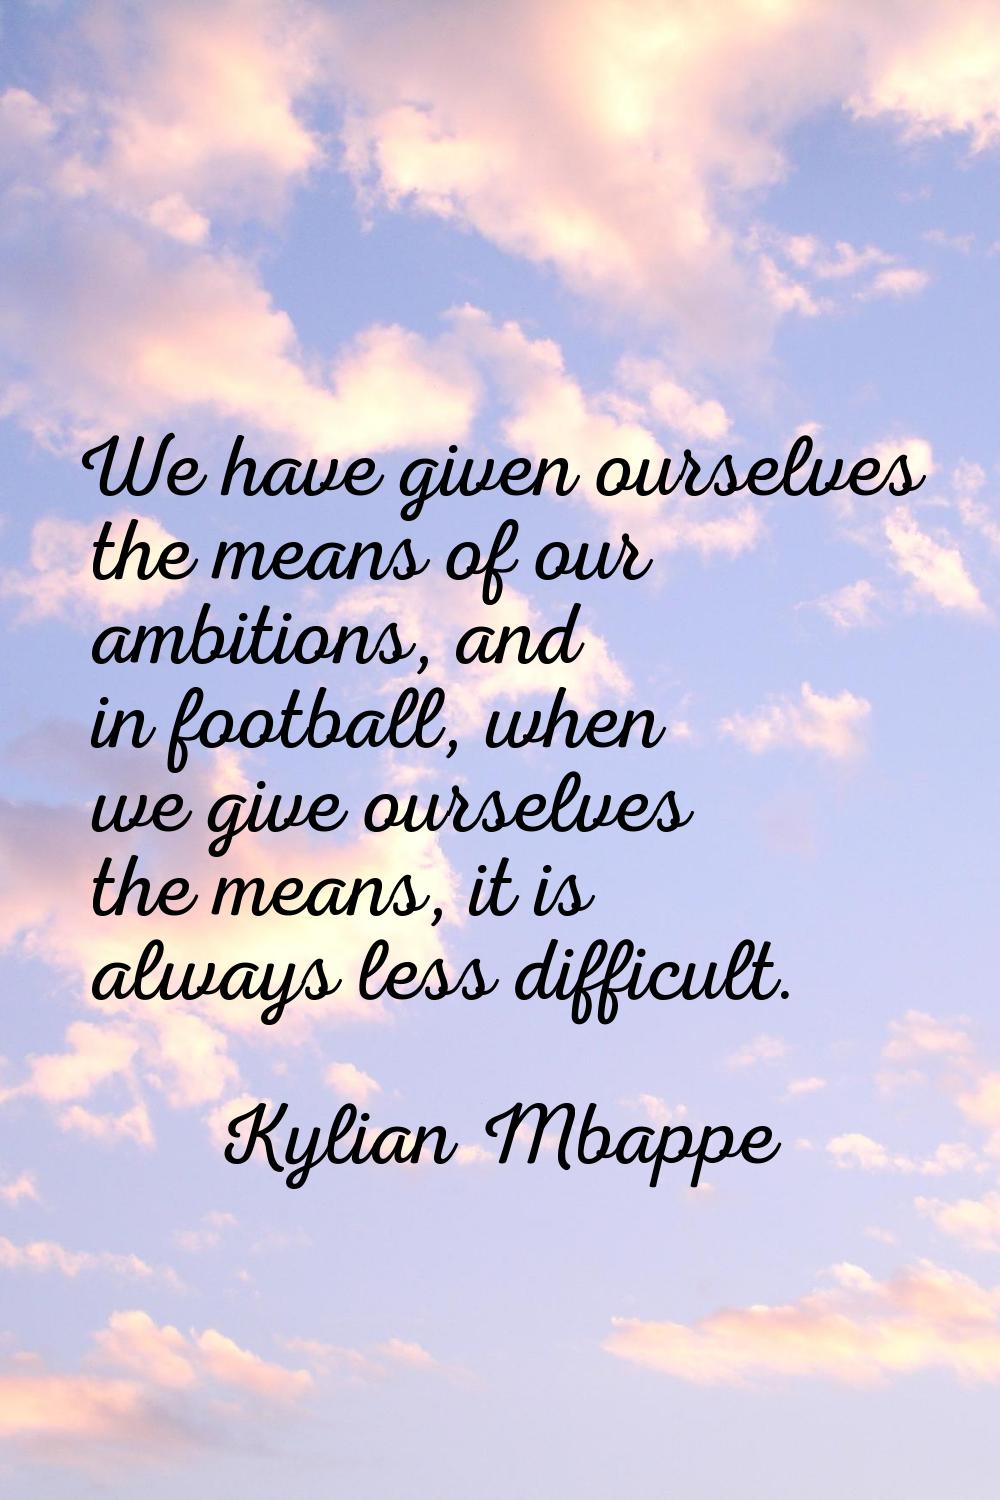 We have given ourselves the means of our ambitions, and in football, when we give ourselves the mea